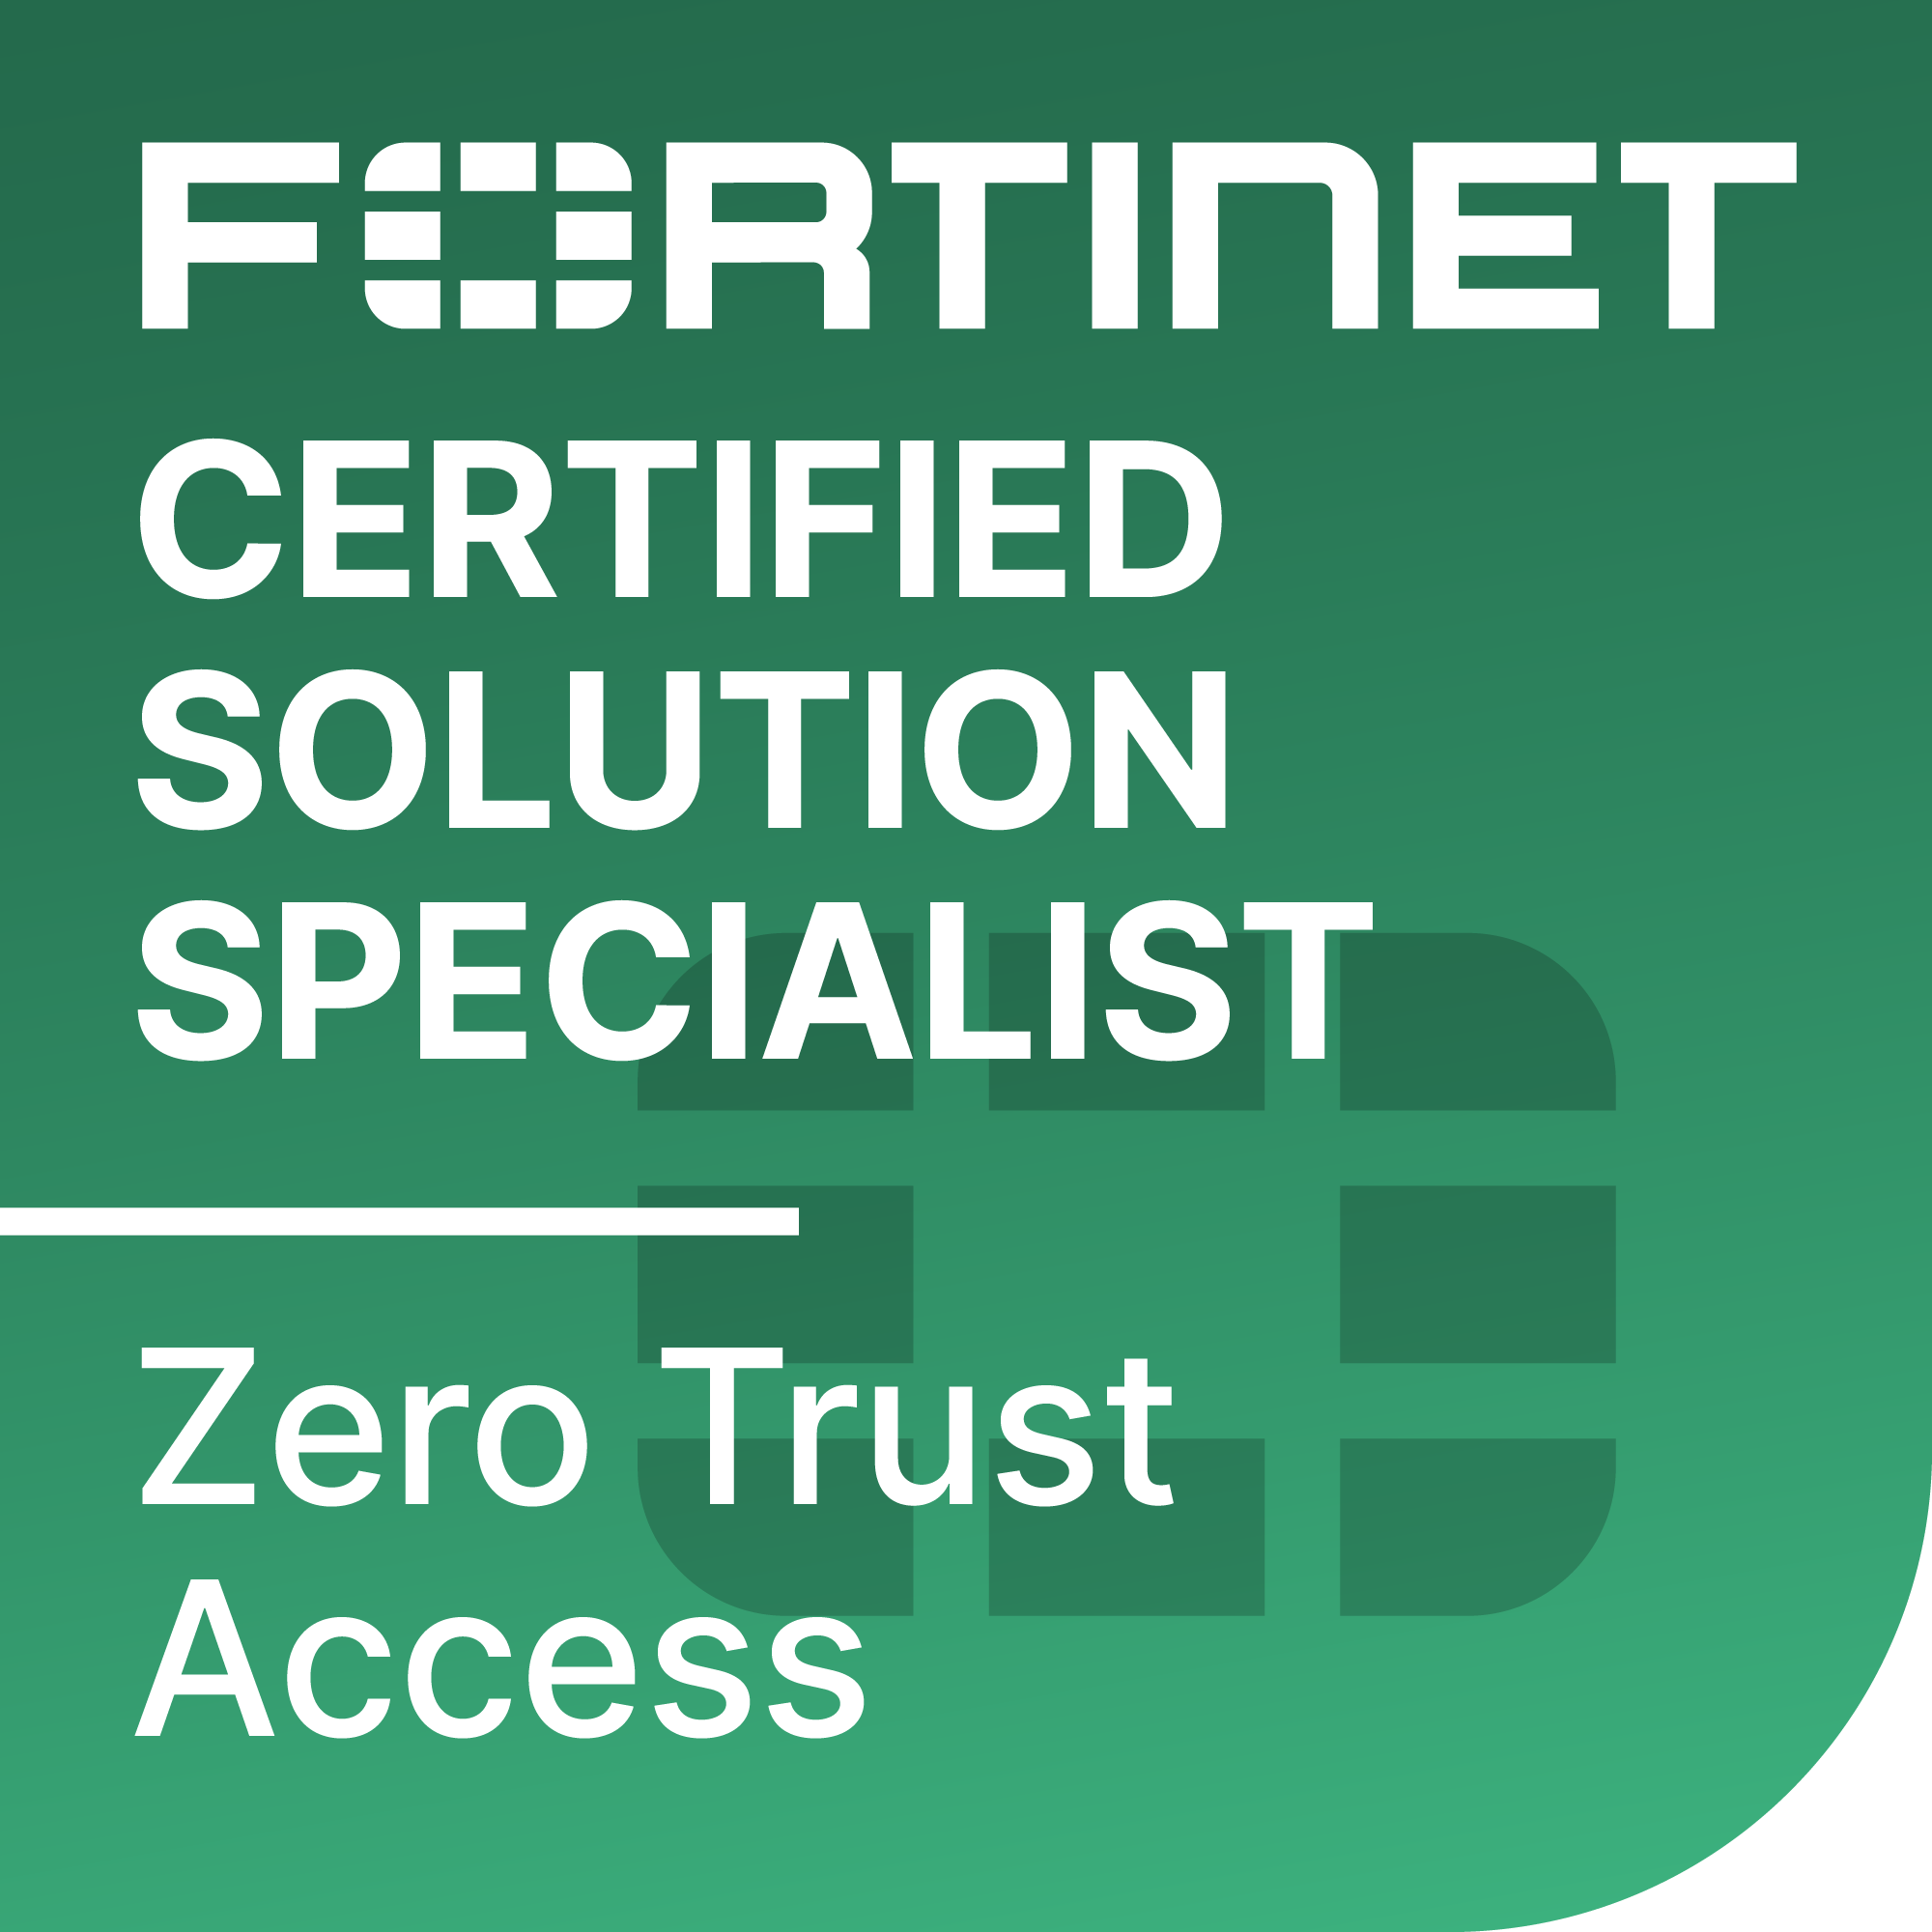 Fortinet Certified Solution Specialist (FCSS) in Zero Trust Access